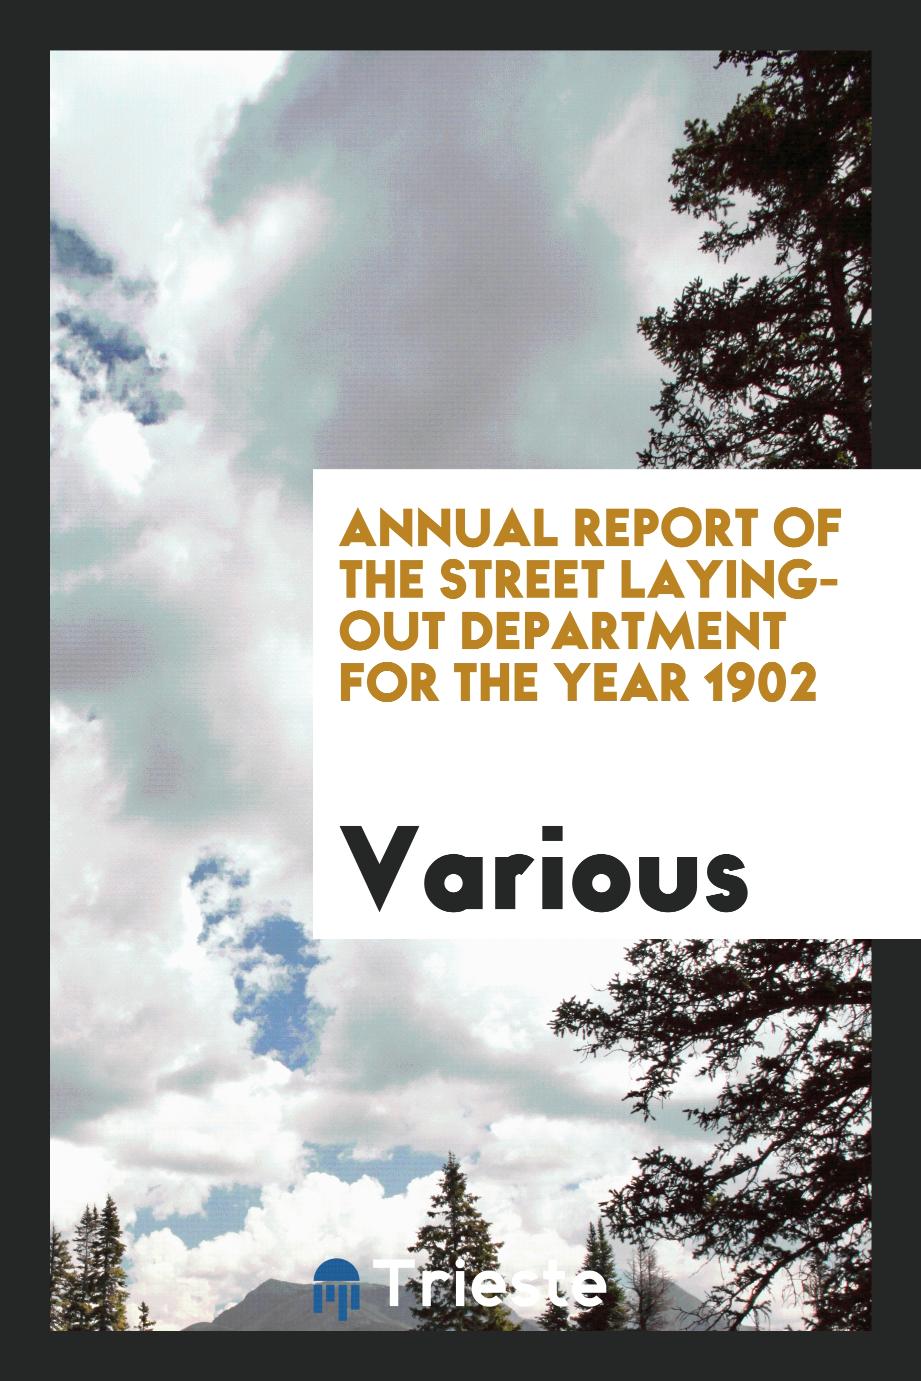 Annual Report of the street Laying-out department for the year 1902